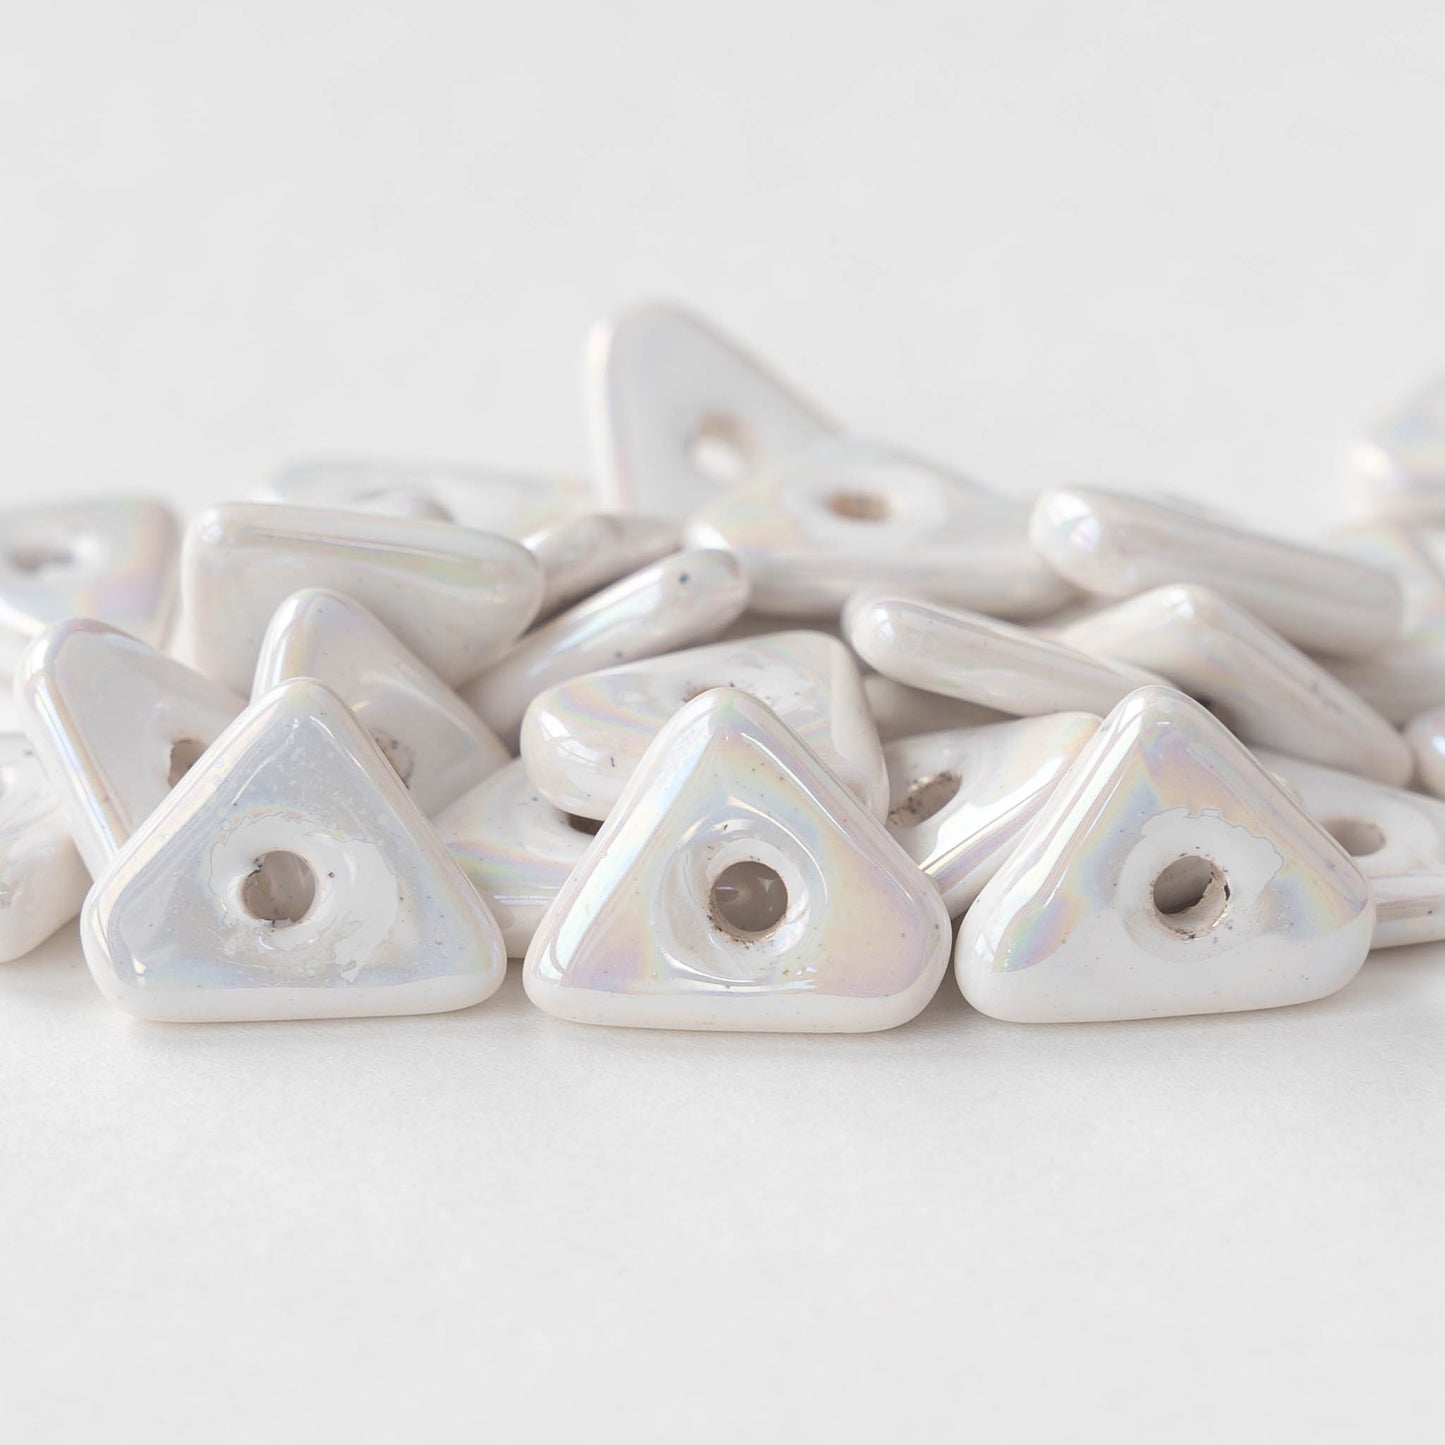 12-13mm Glazed Ceramic Triangle Beads - Ivory Opal Luster - 10 or 30